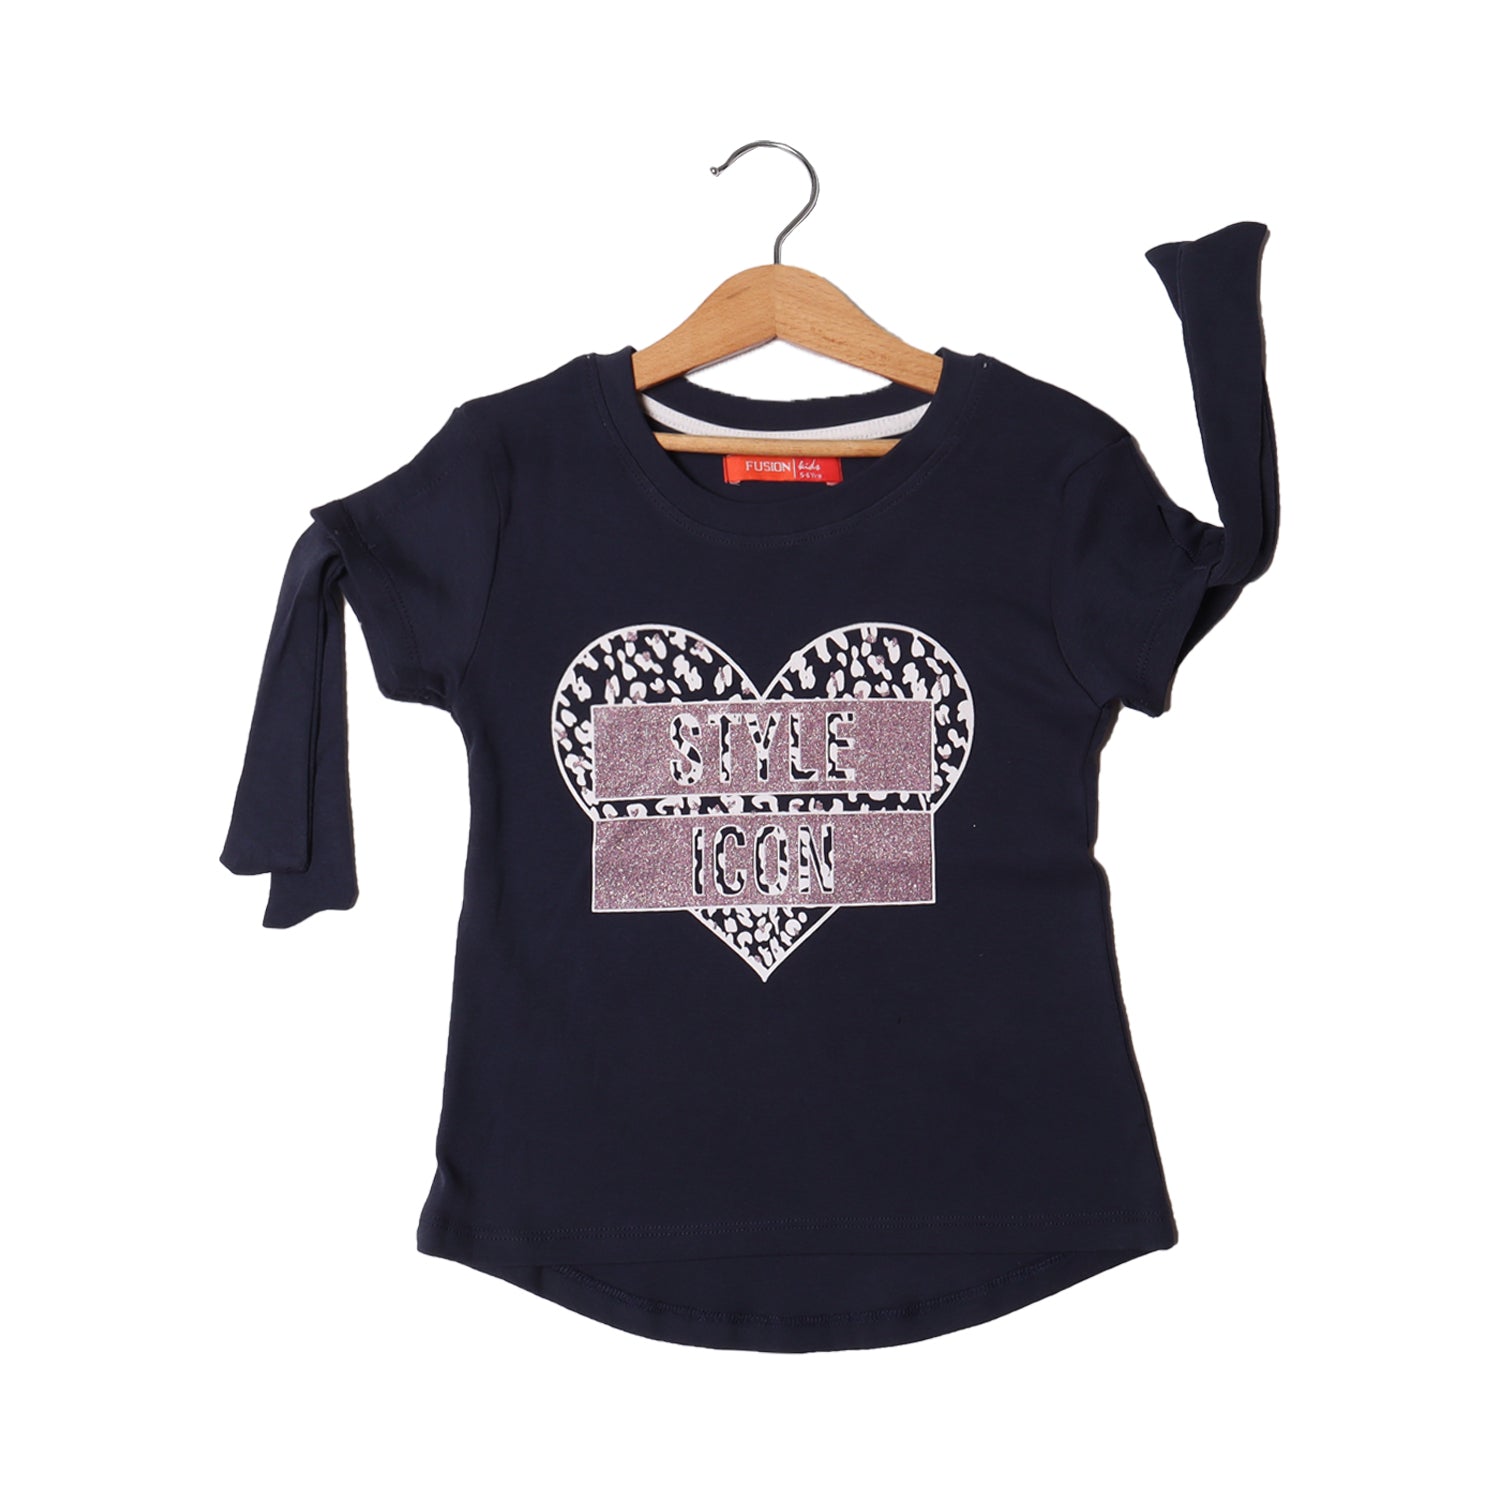 NAVY BLUE HEART STYLE ICON PRINTED T-SHIRT FOR GIRLS